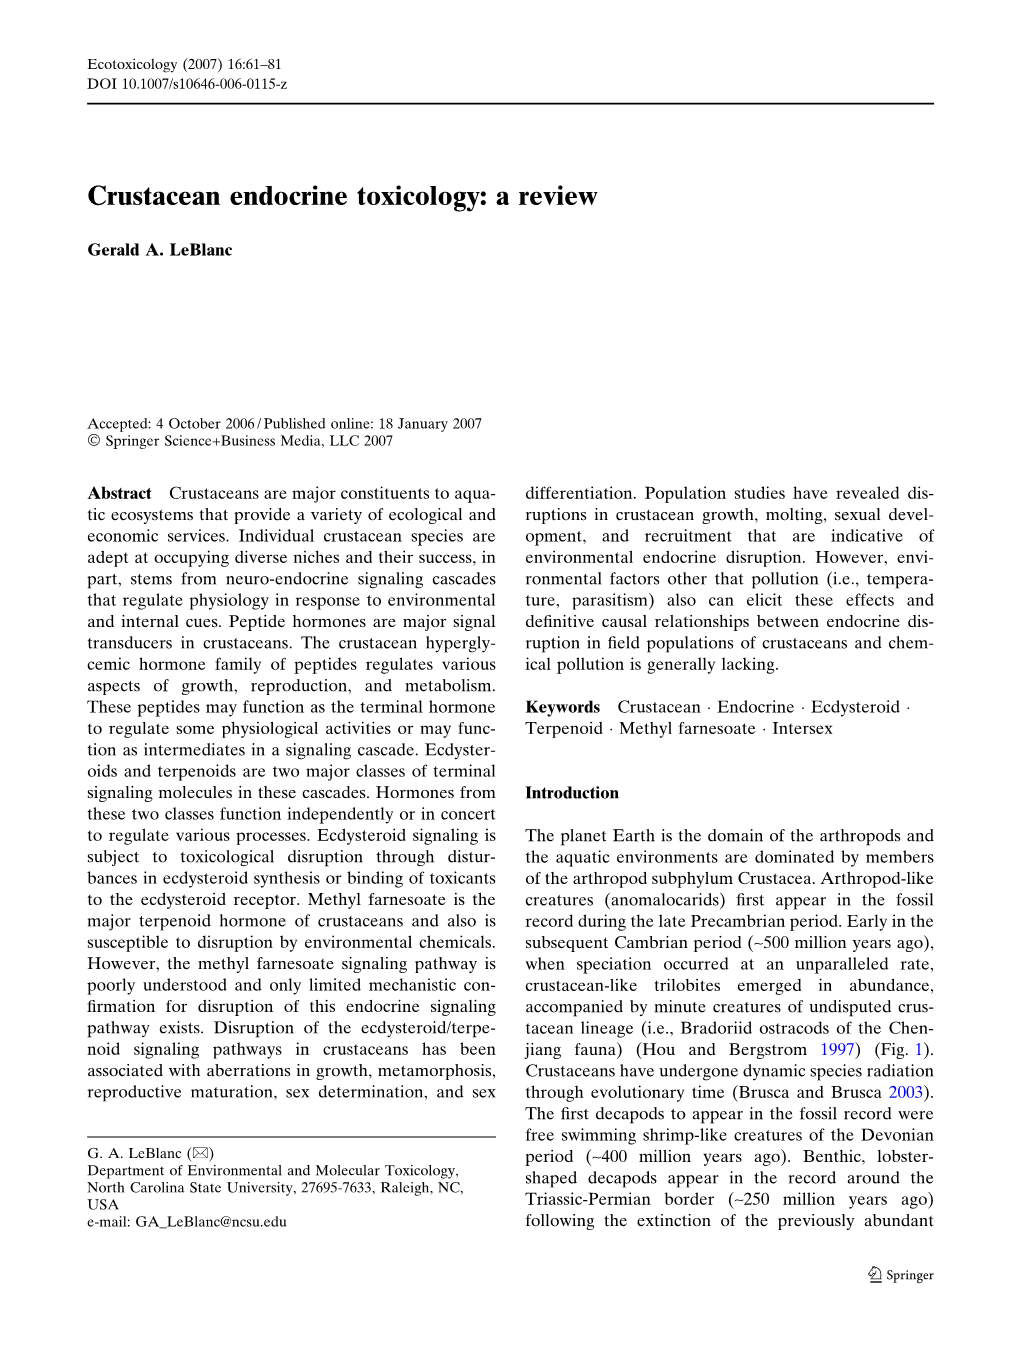 Crustacean Endocrine Toxicology: a Review